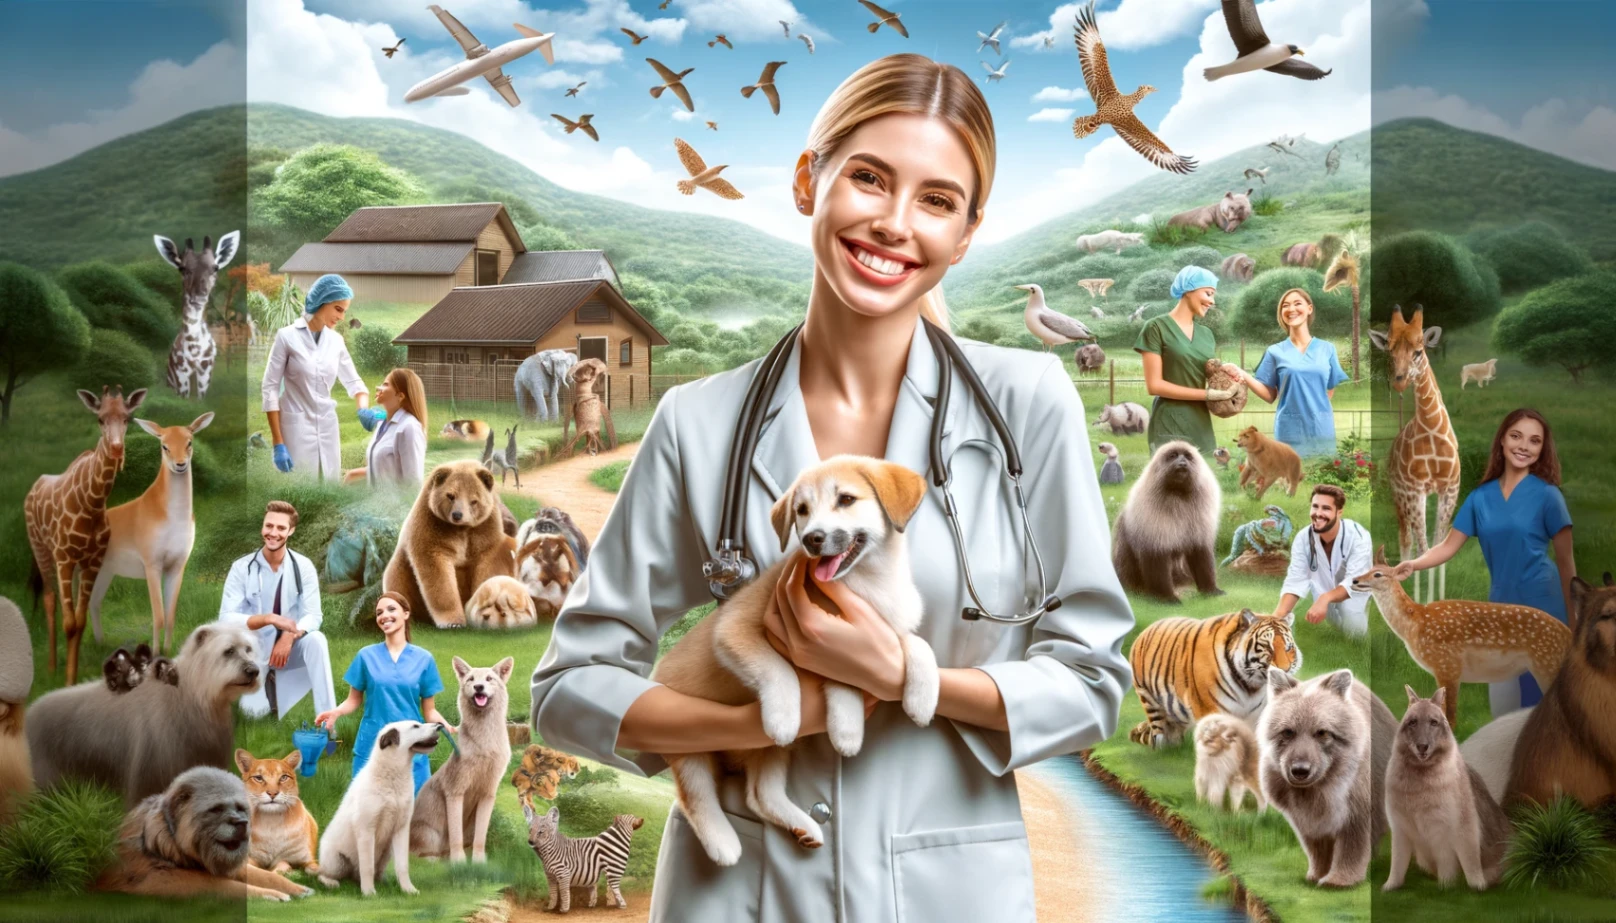 Animal Care Jobs: Explore a Range of Opportunities – Full-Time and Part-Time Shifts Available!